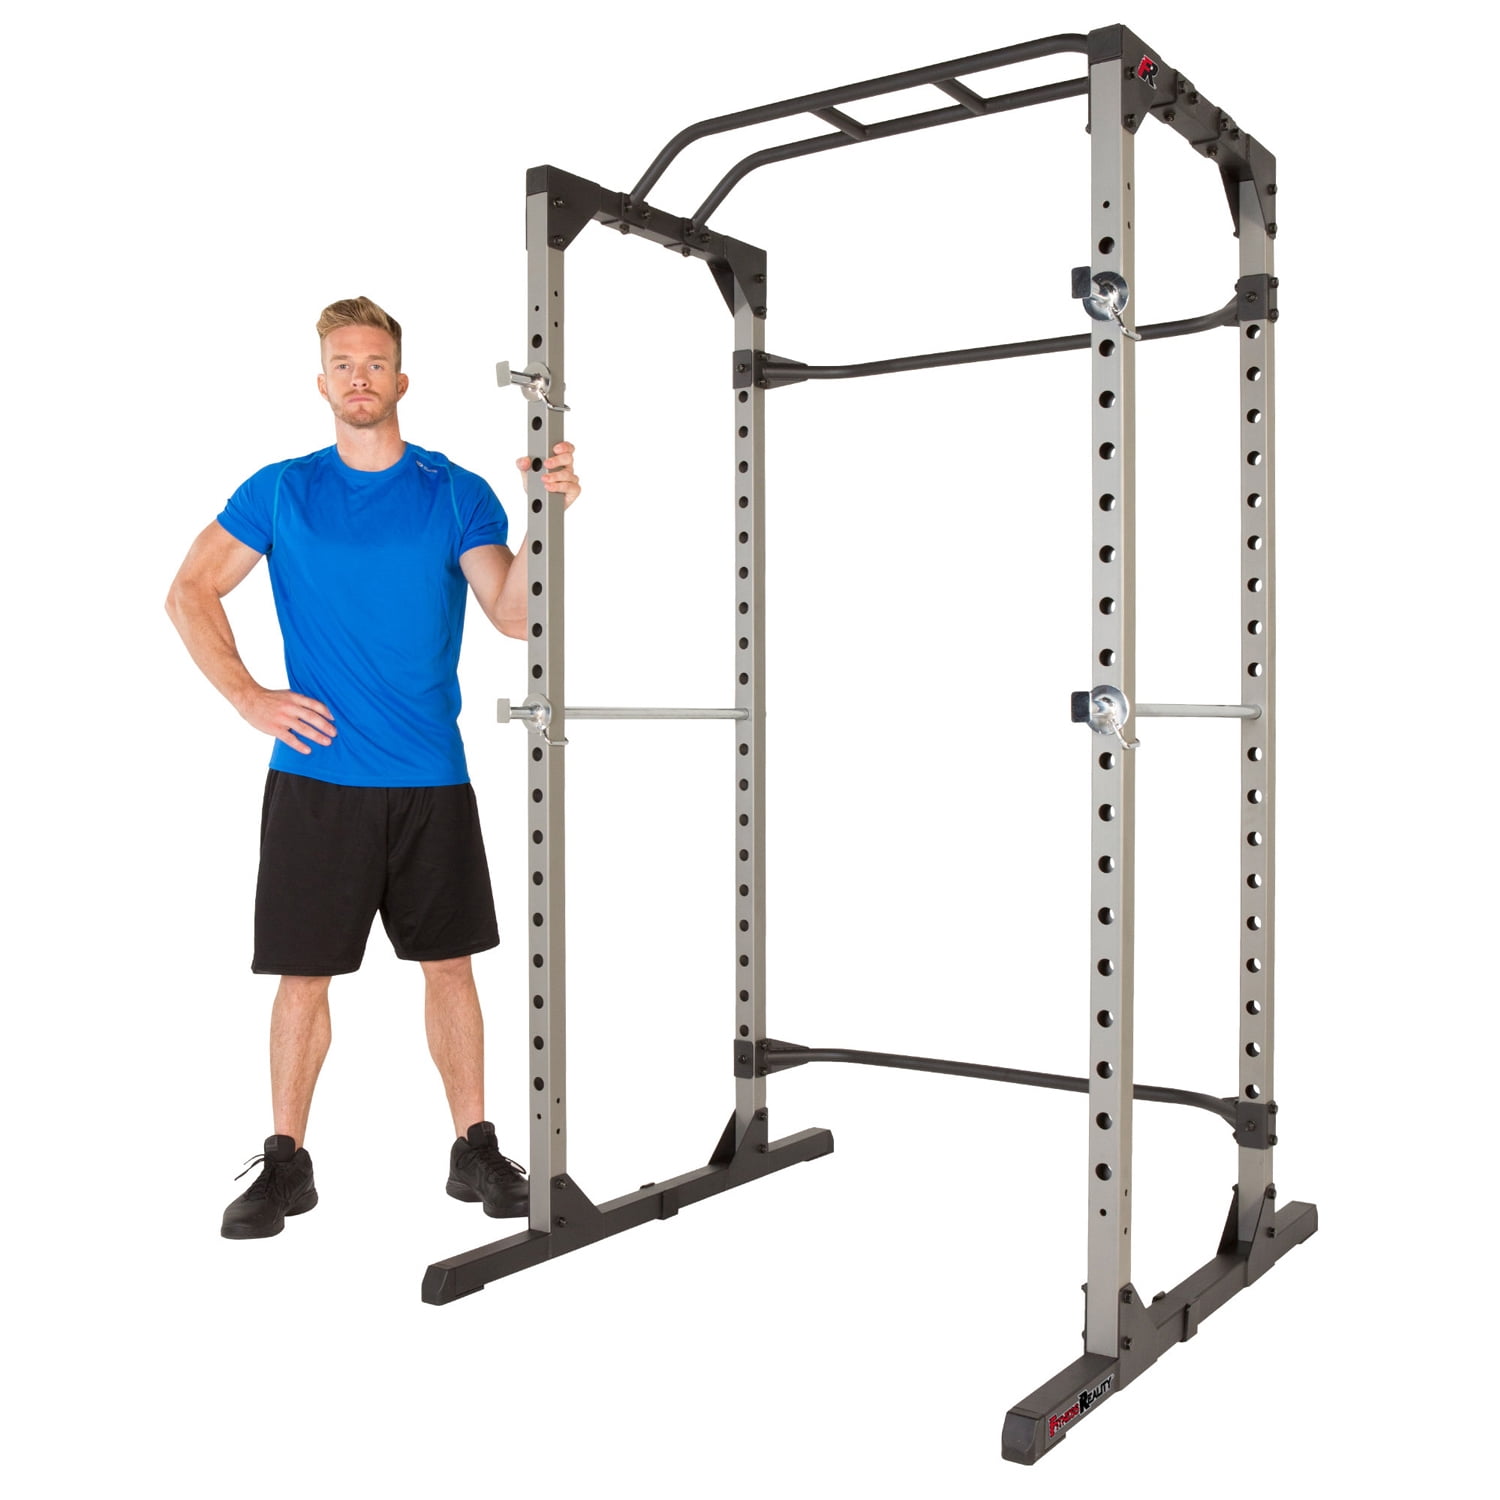 T-3 Series Power Rack - 1,100 LB Capacity Cage for Weightlifting and  Strength Training